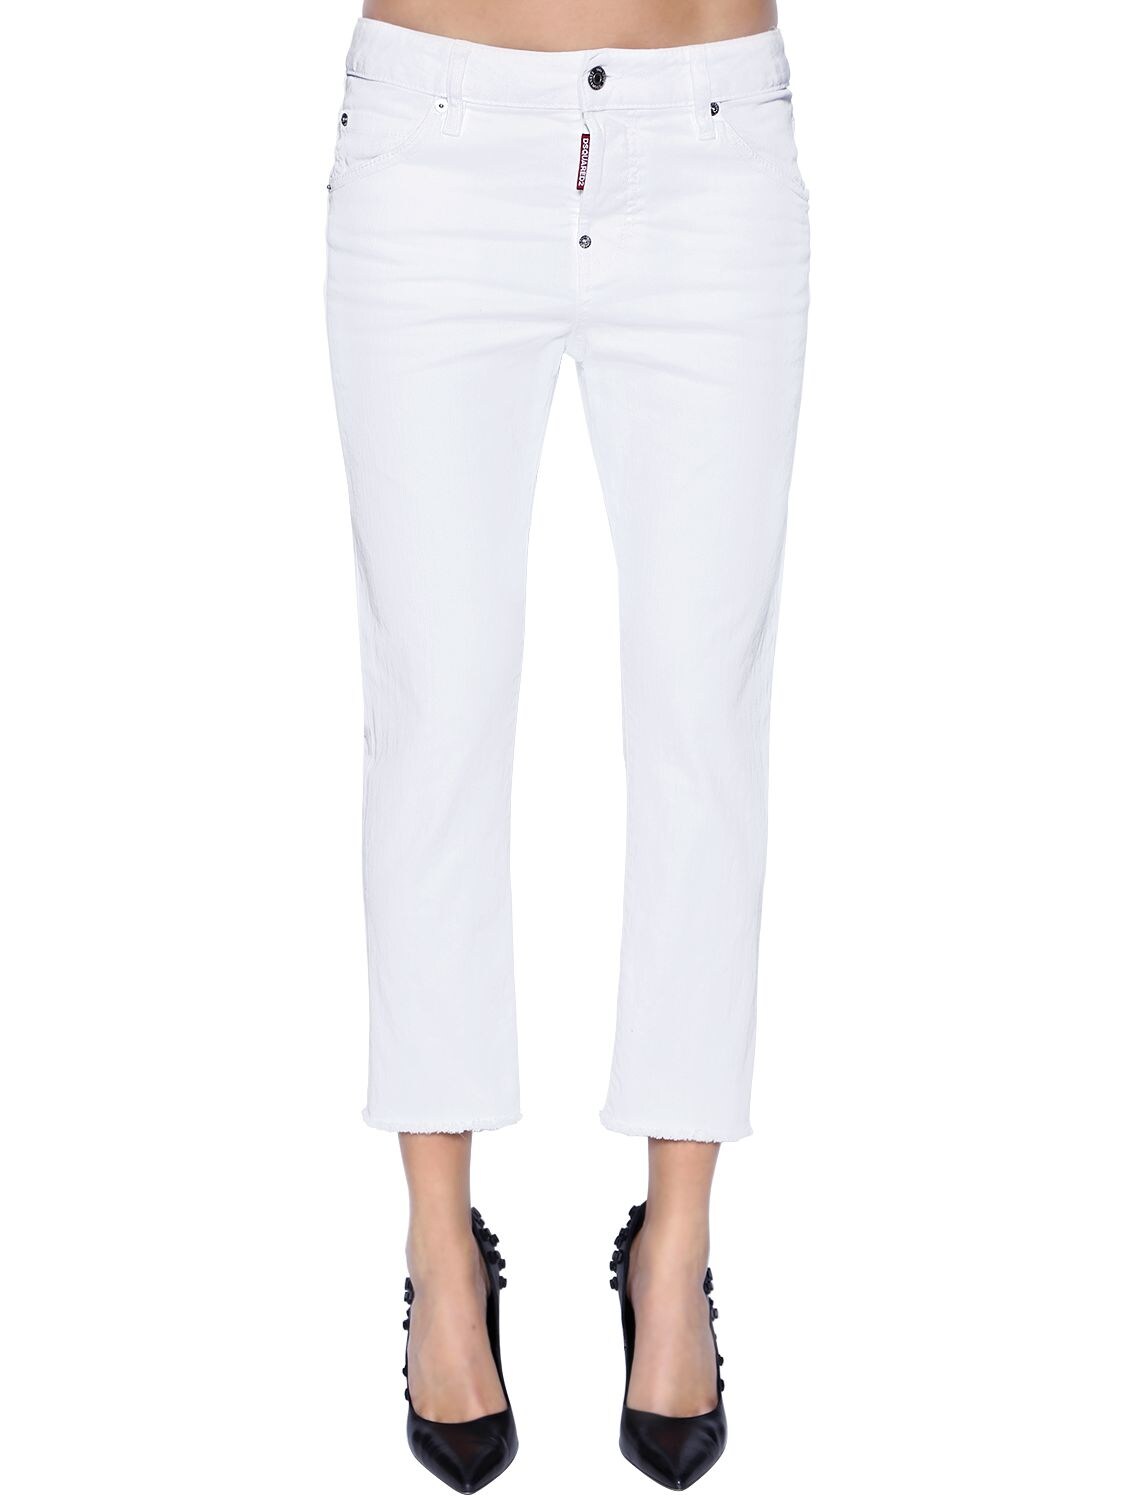 DSQUARED2 COOL GIRL CROPPED DENIM JEANS,68I07Y033-MTAW0